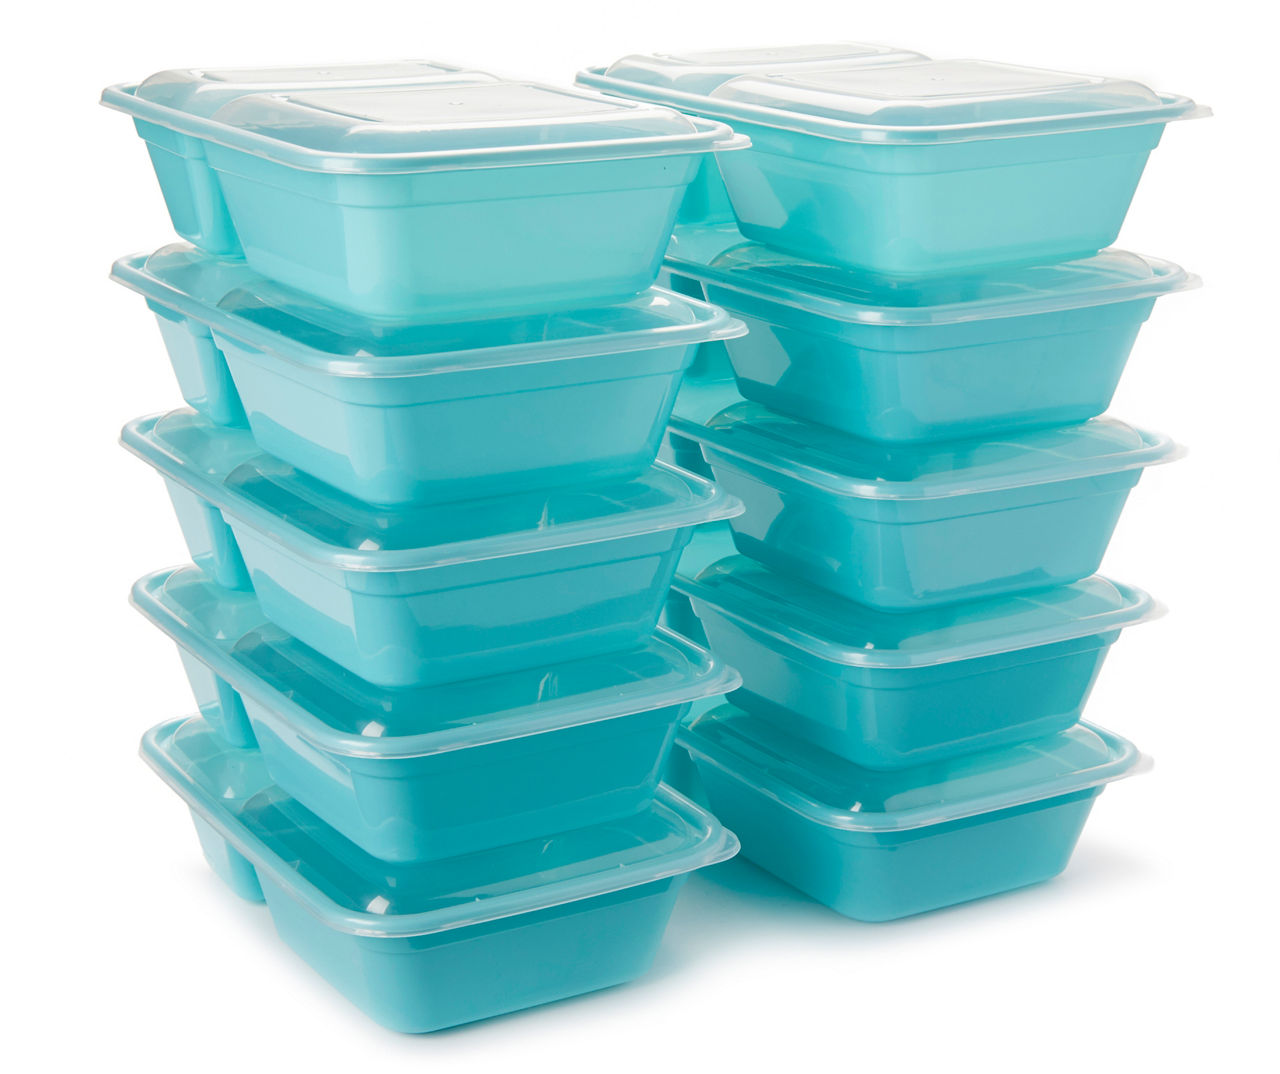 2 Compartment Meal Prep Food Containers (10 Pack)